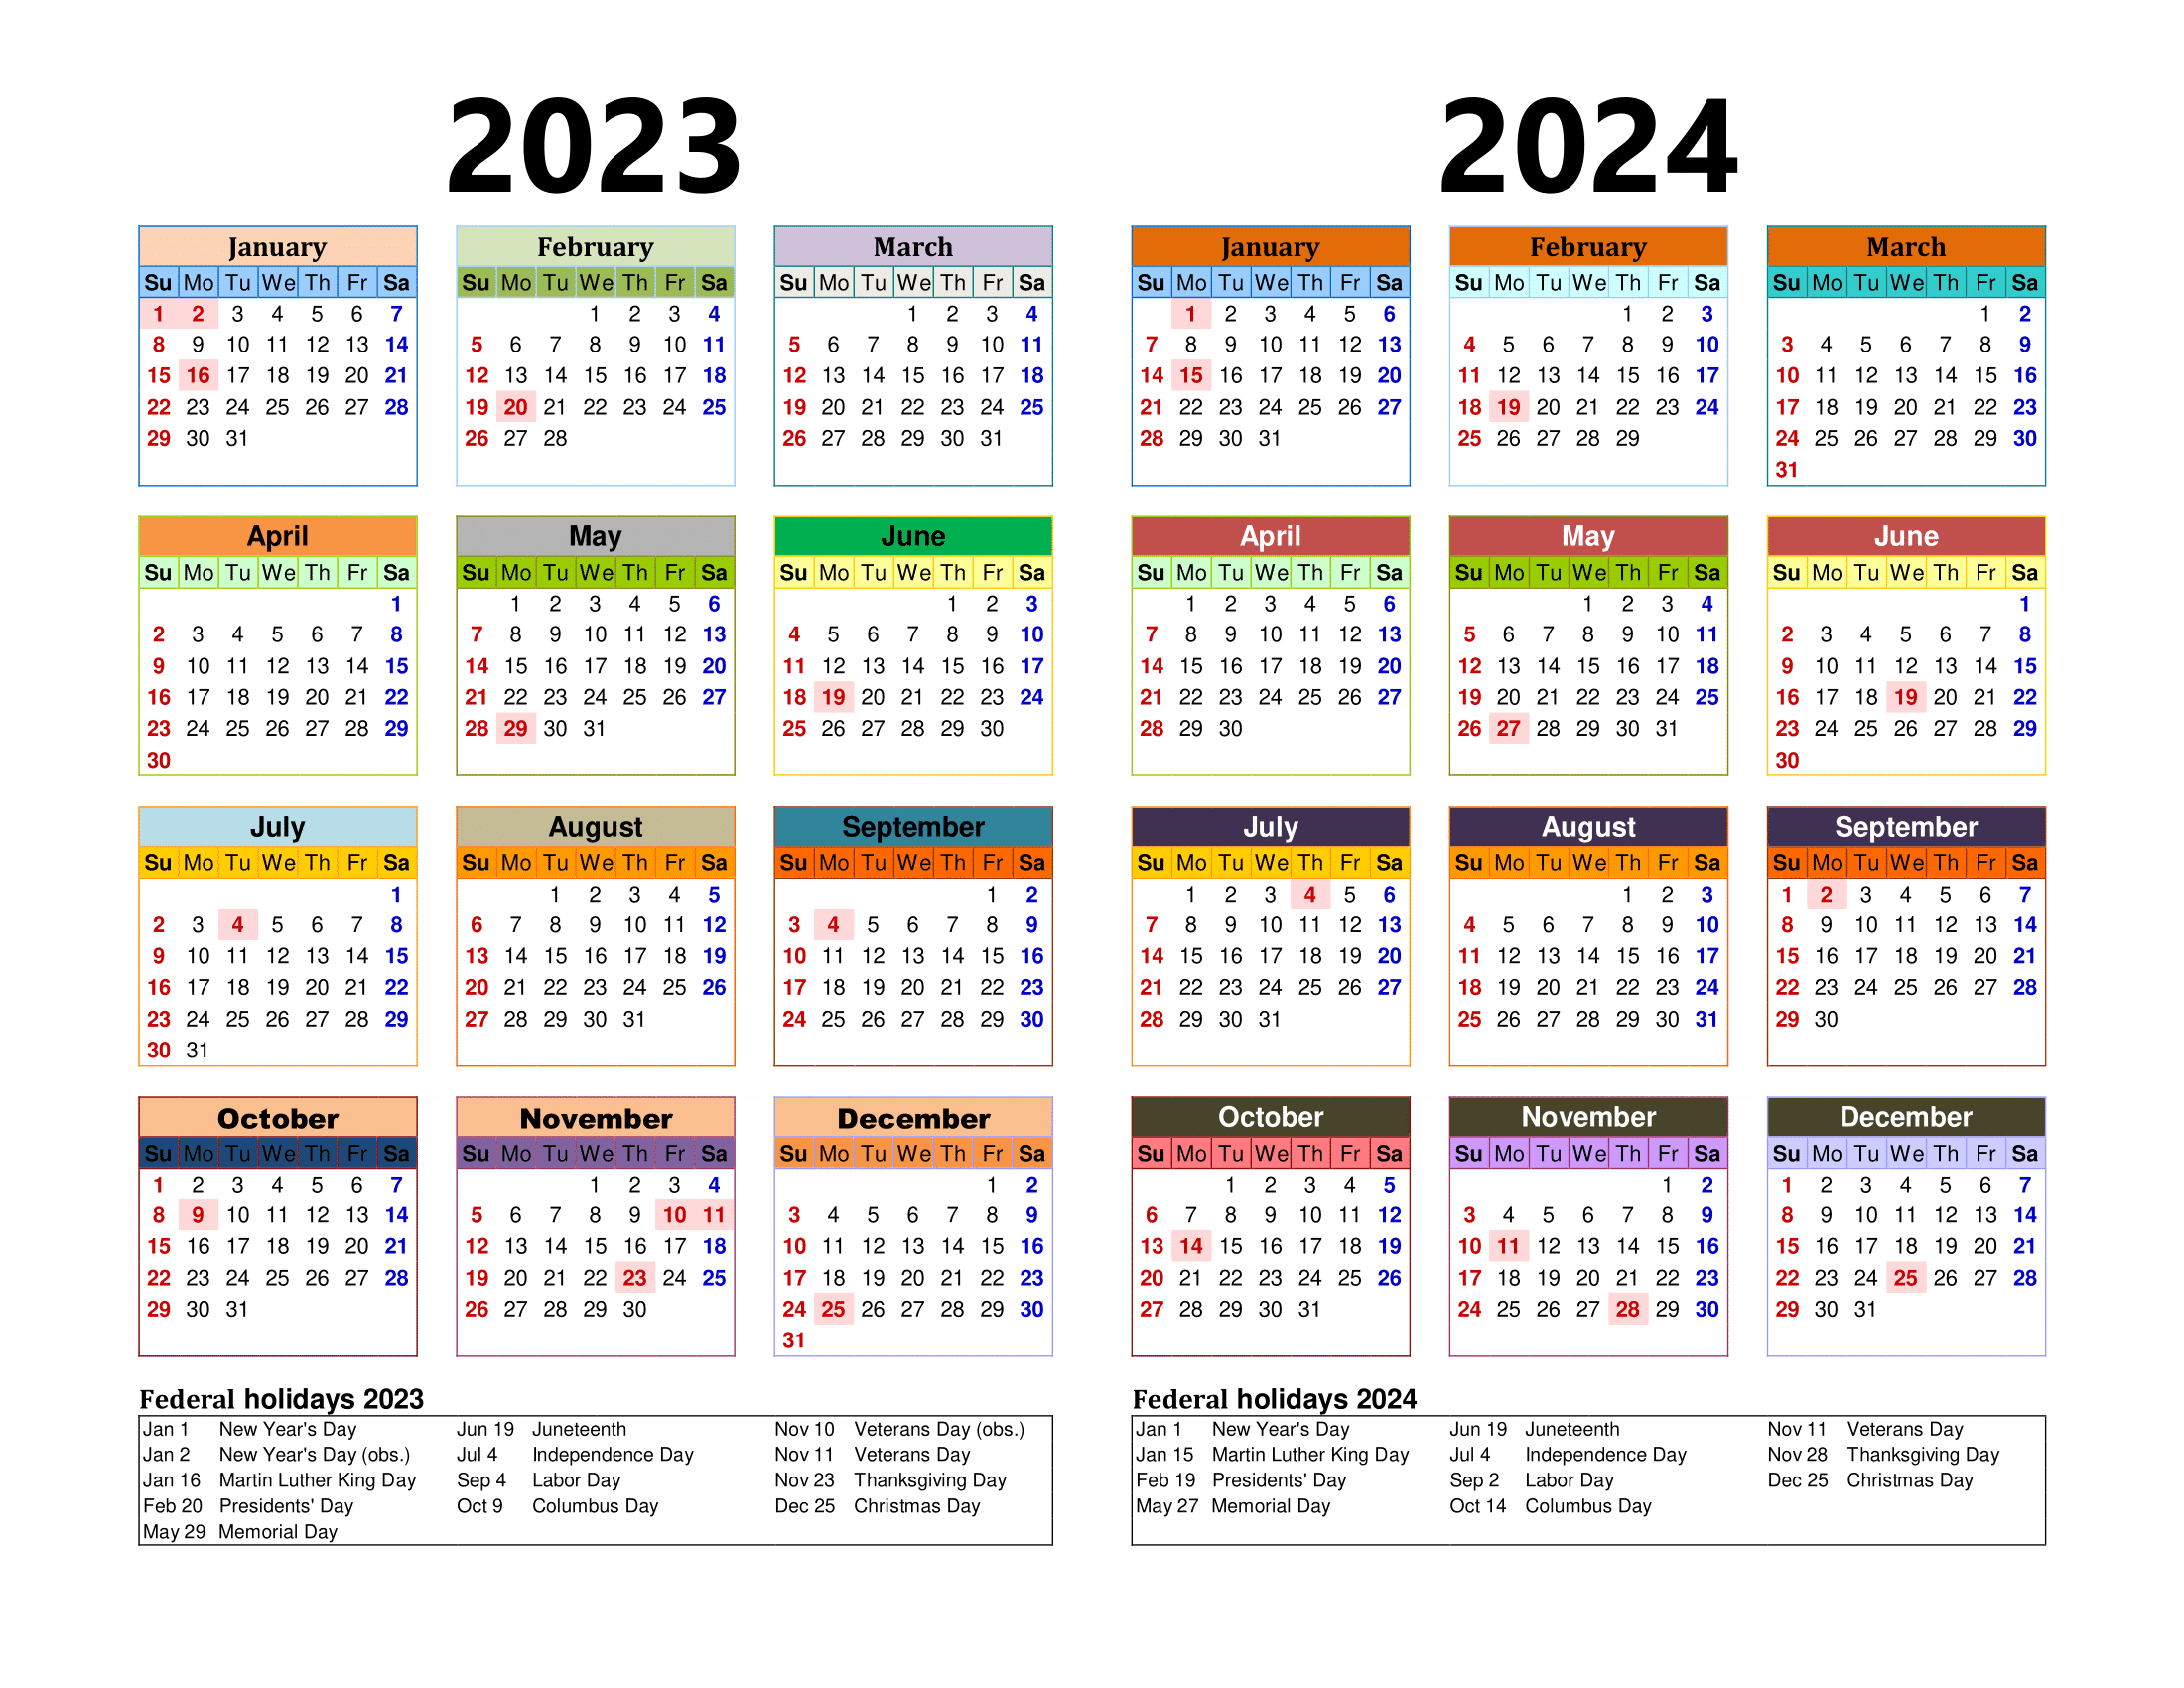 Free Printable Two Year Calendar Templates For 2023 And 2024 In Pdf | Printable Calendar For 2023 2024